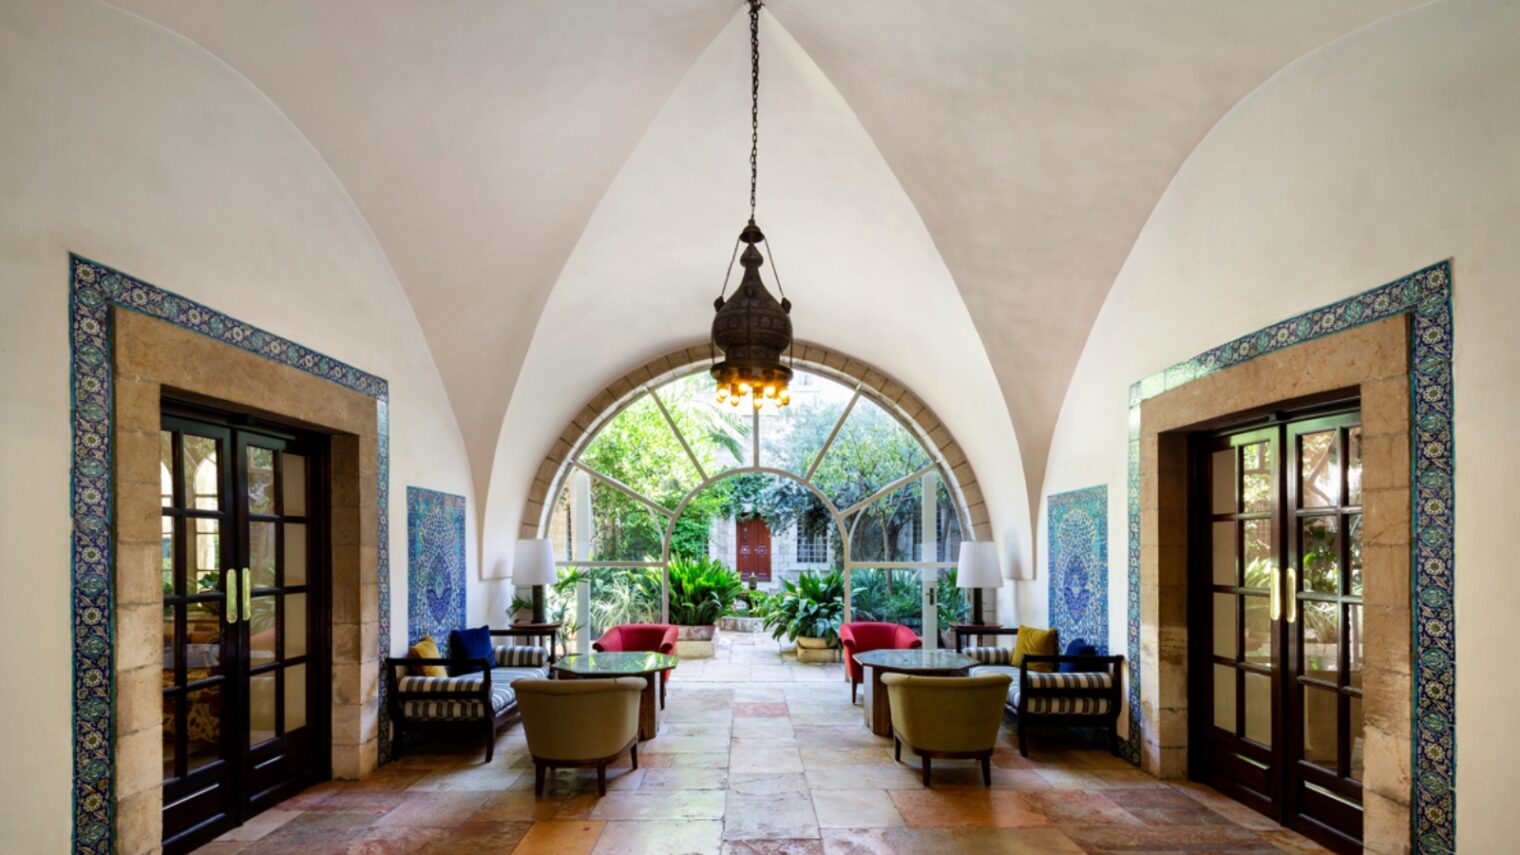 The hotel’s foyer has a domed ceiling and Armenian mosaics. Photo by Mikaela Burstow